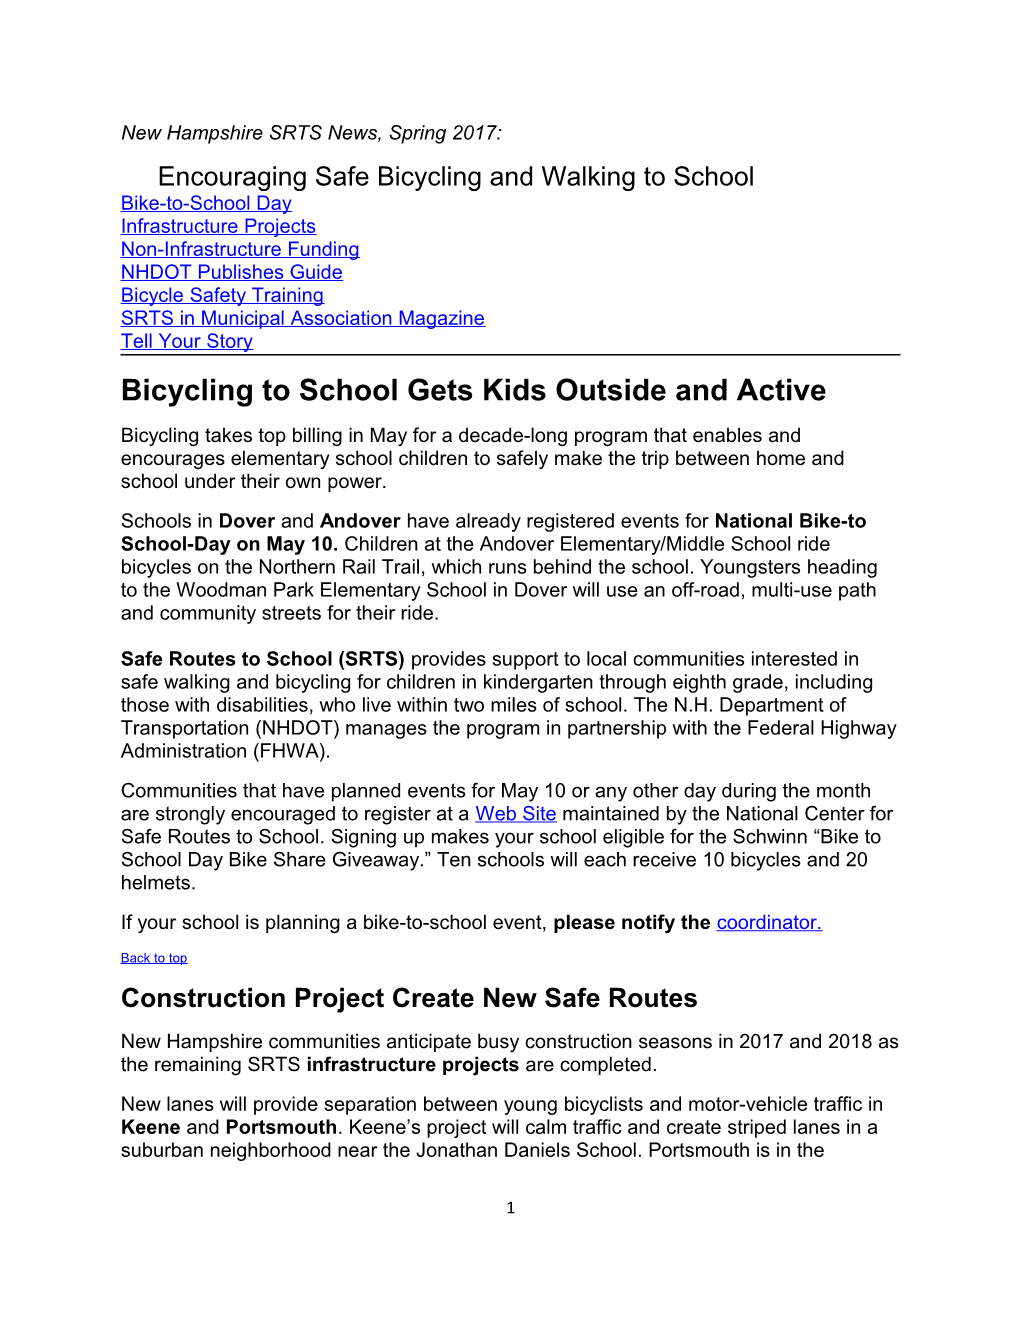 Bicycling to School Gets Kids Outside and Active